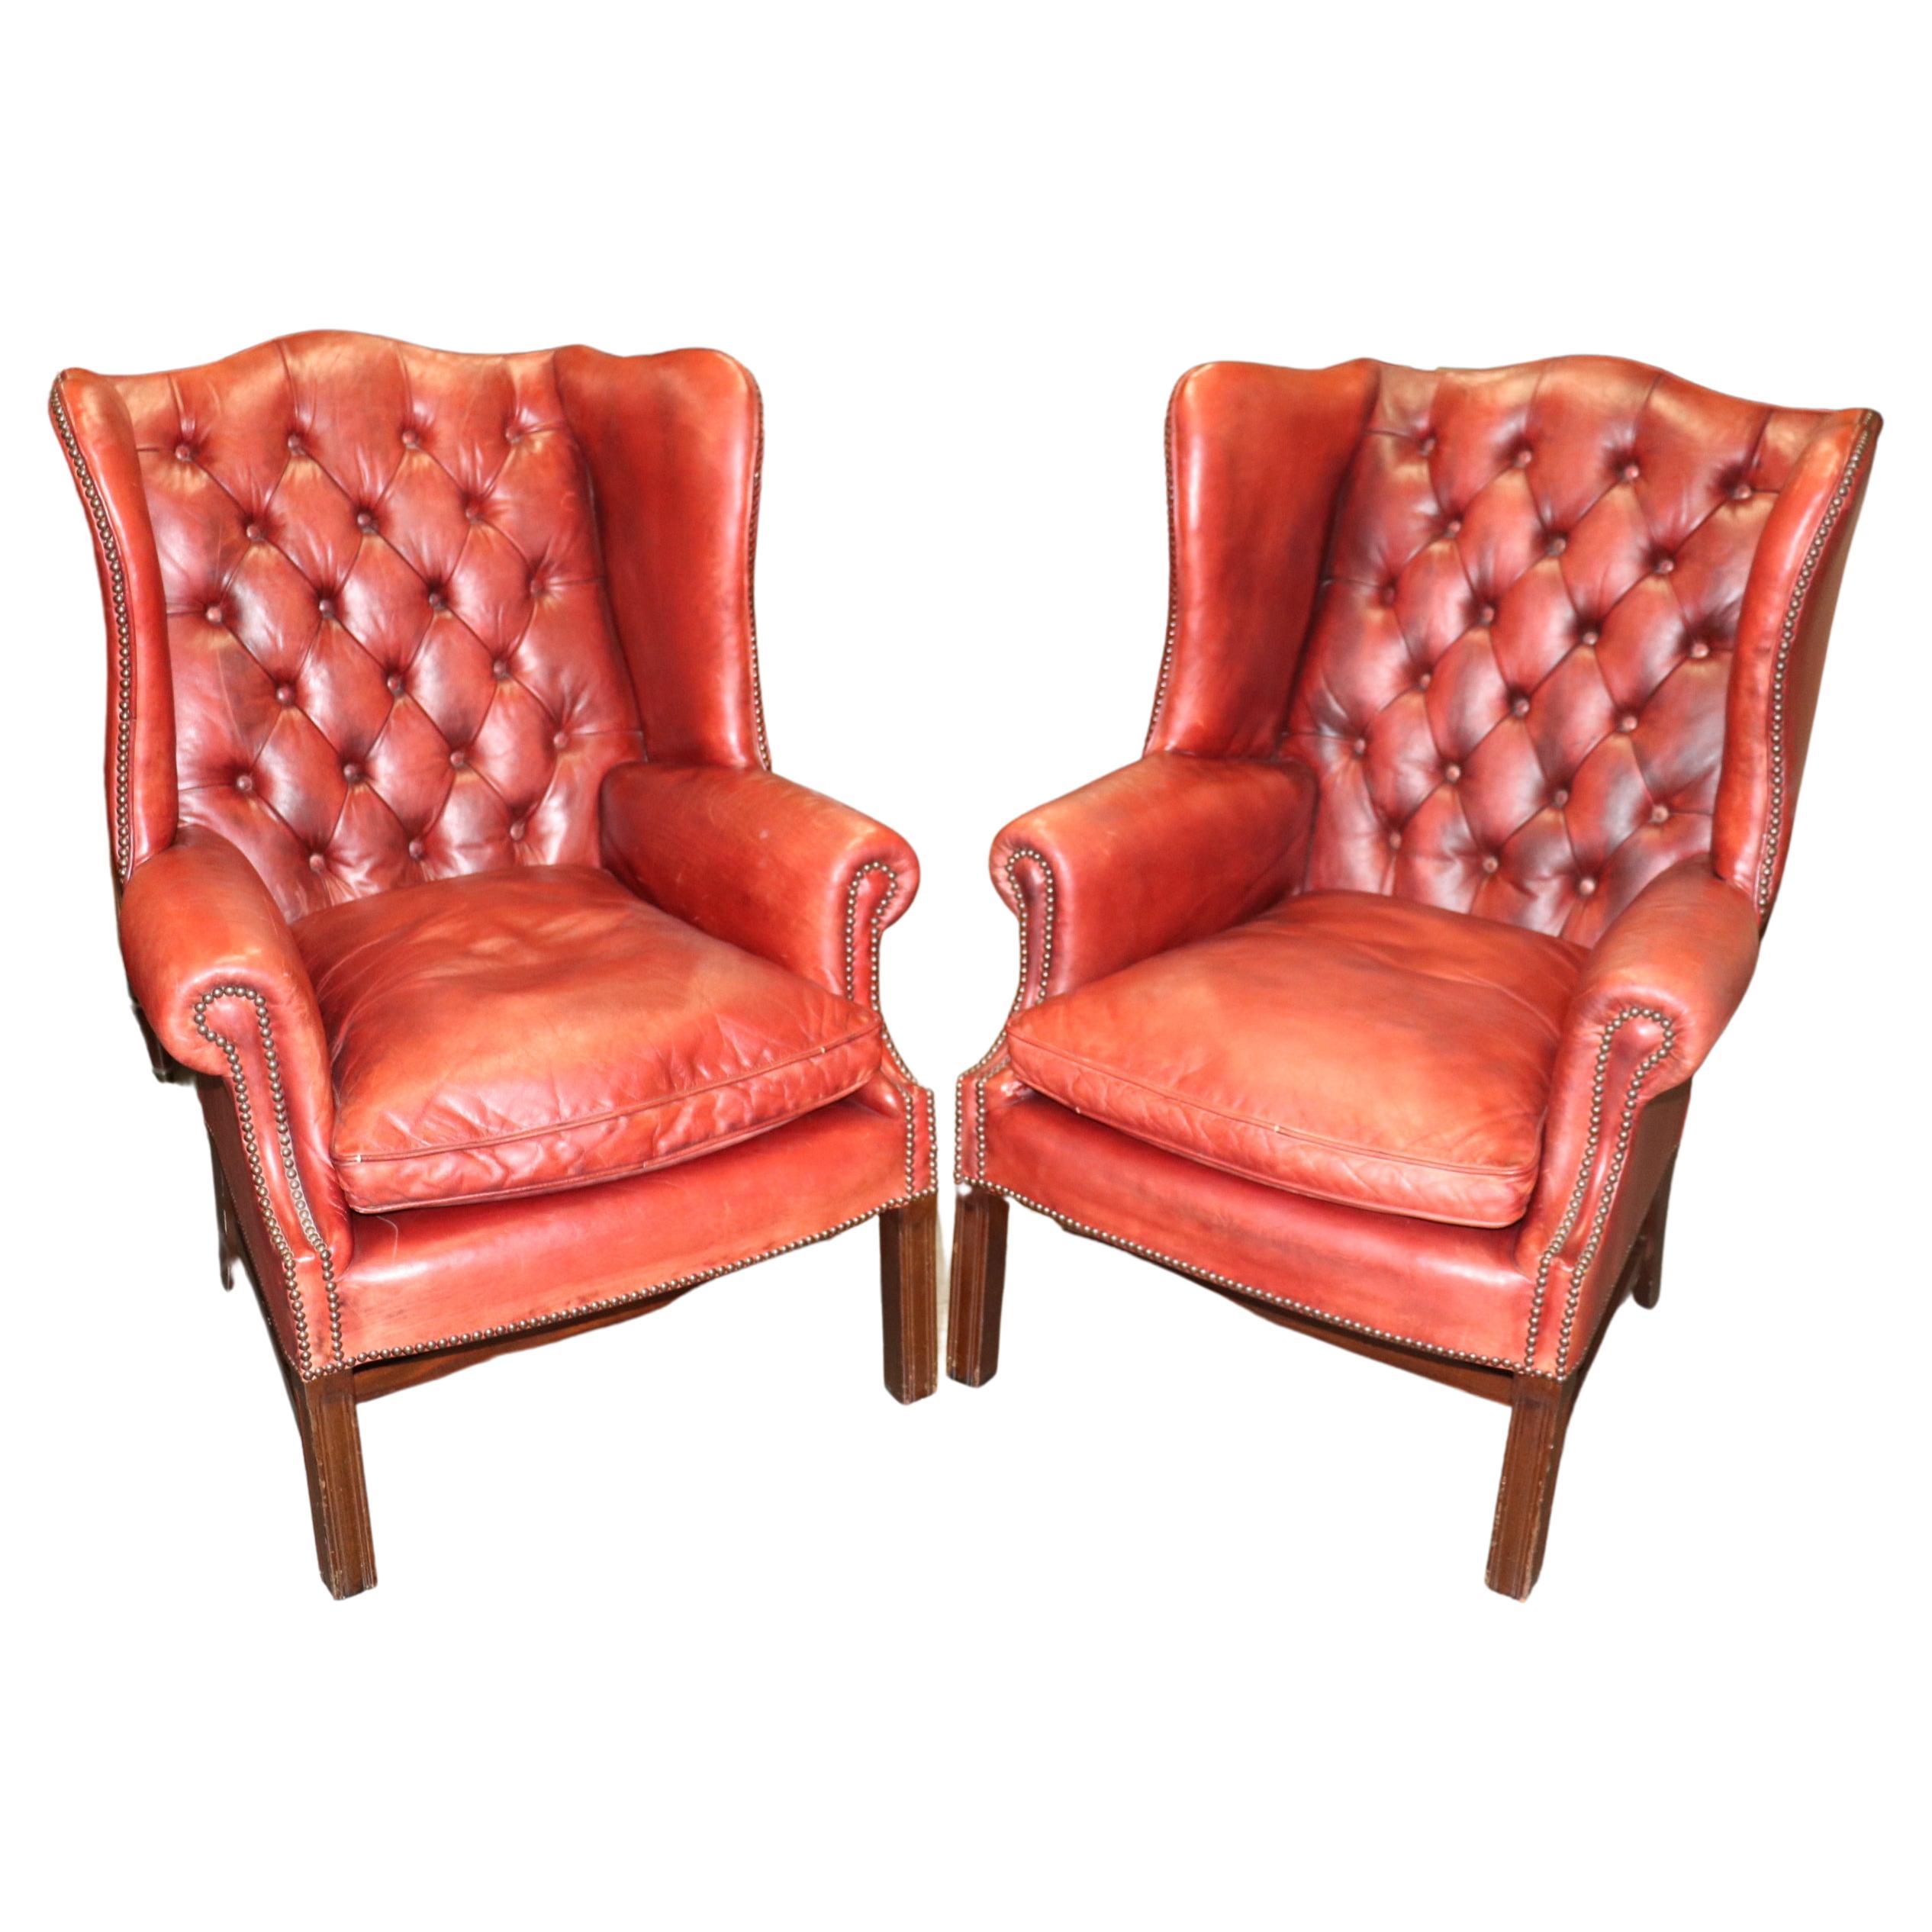 Pair Antique 1920s Era Red Leather Chertfield Tufted Georgian Wingback Chairs